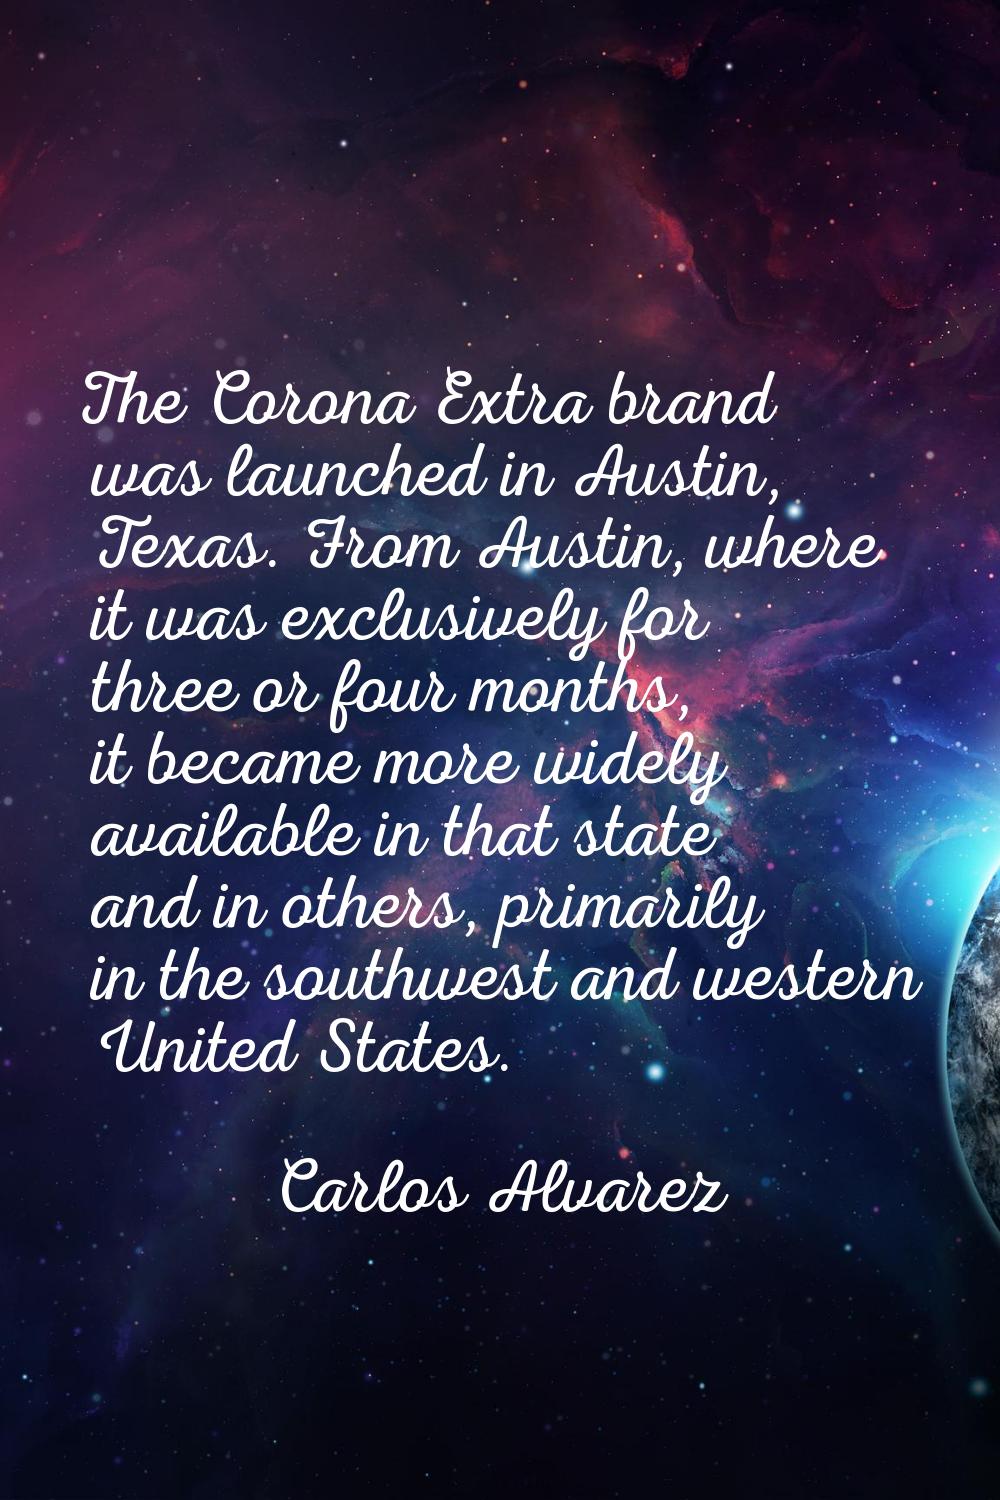 The Corona Extra brand was launched in Austin, Texas. From Austin, where it was exclusively for thr